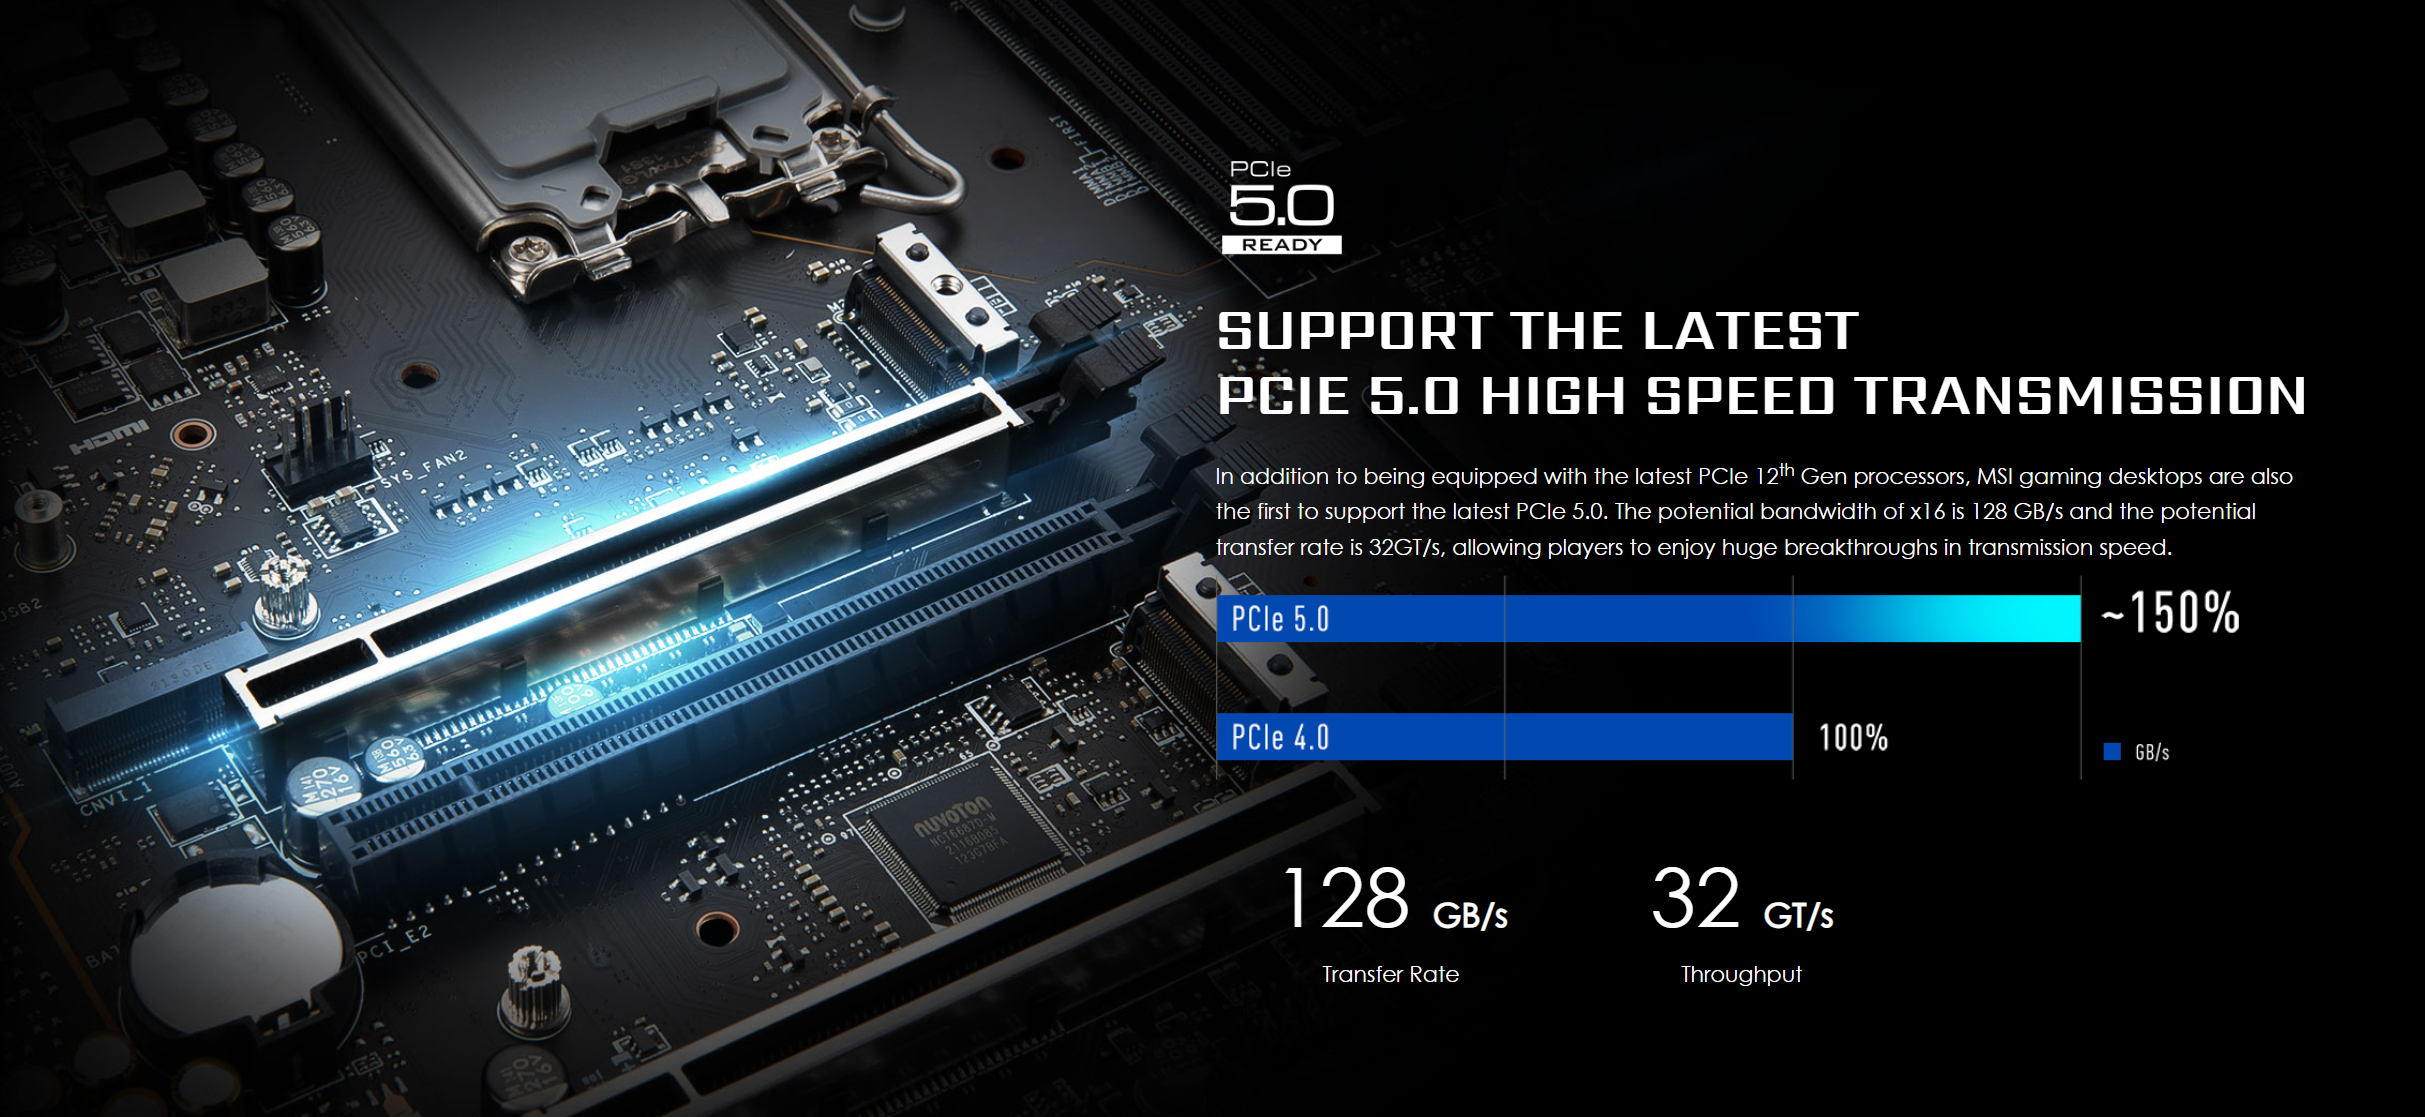 Support the latest PCIE 5.0 High speed transmission